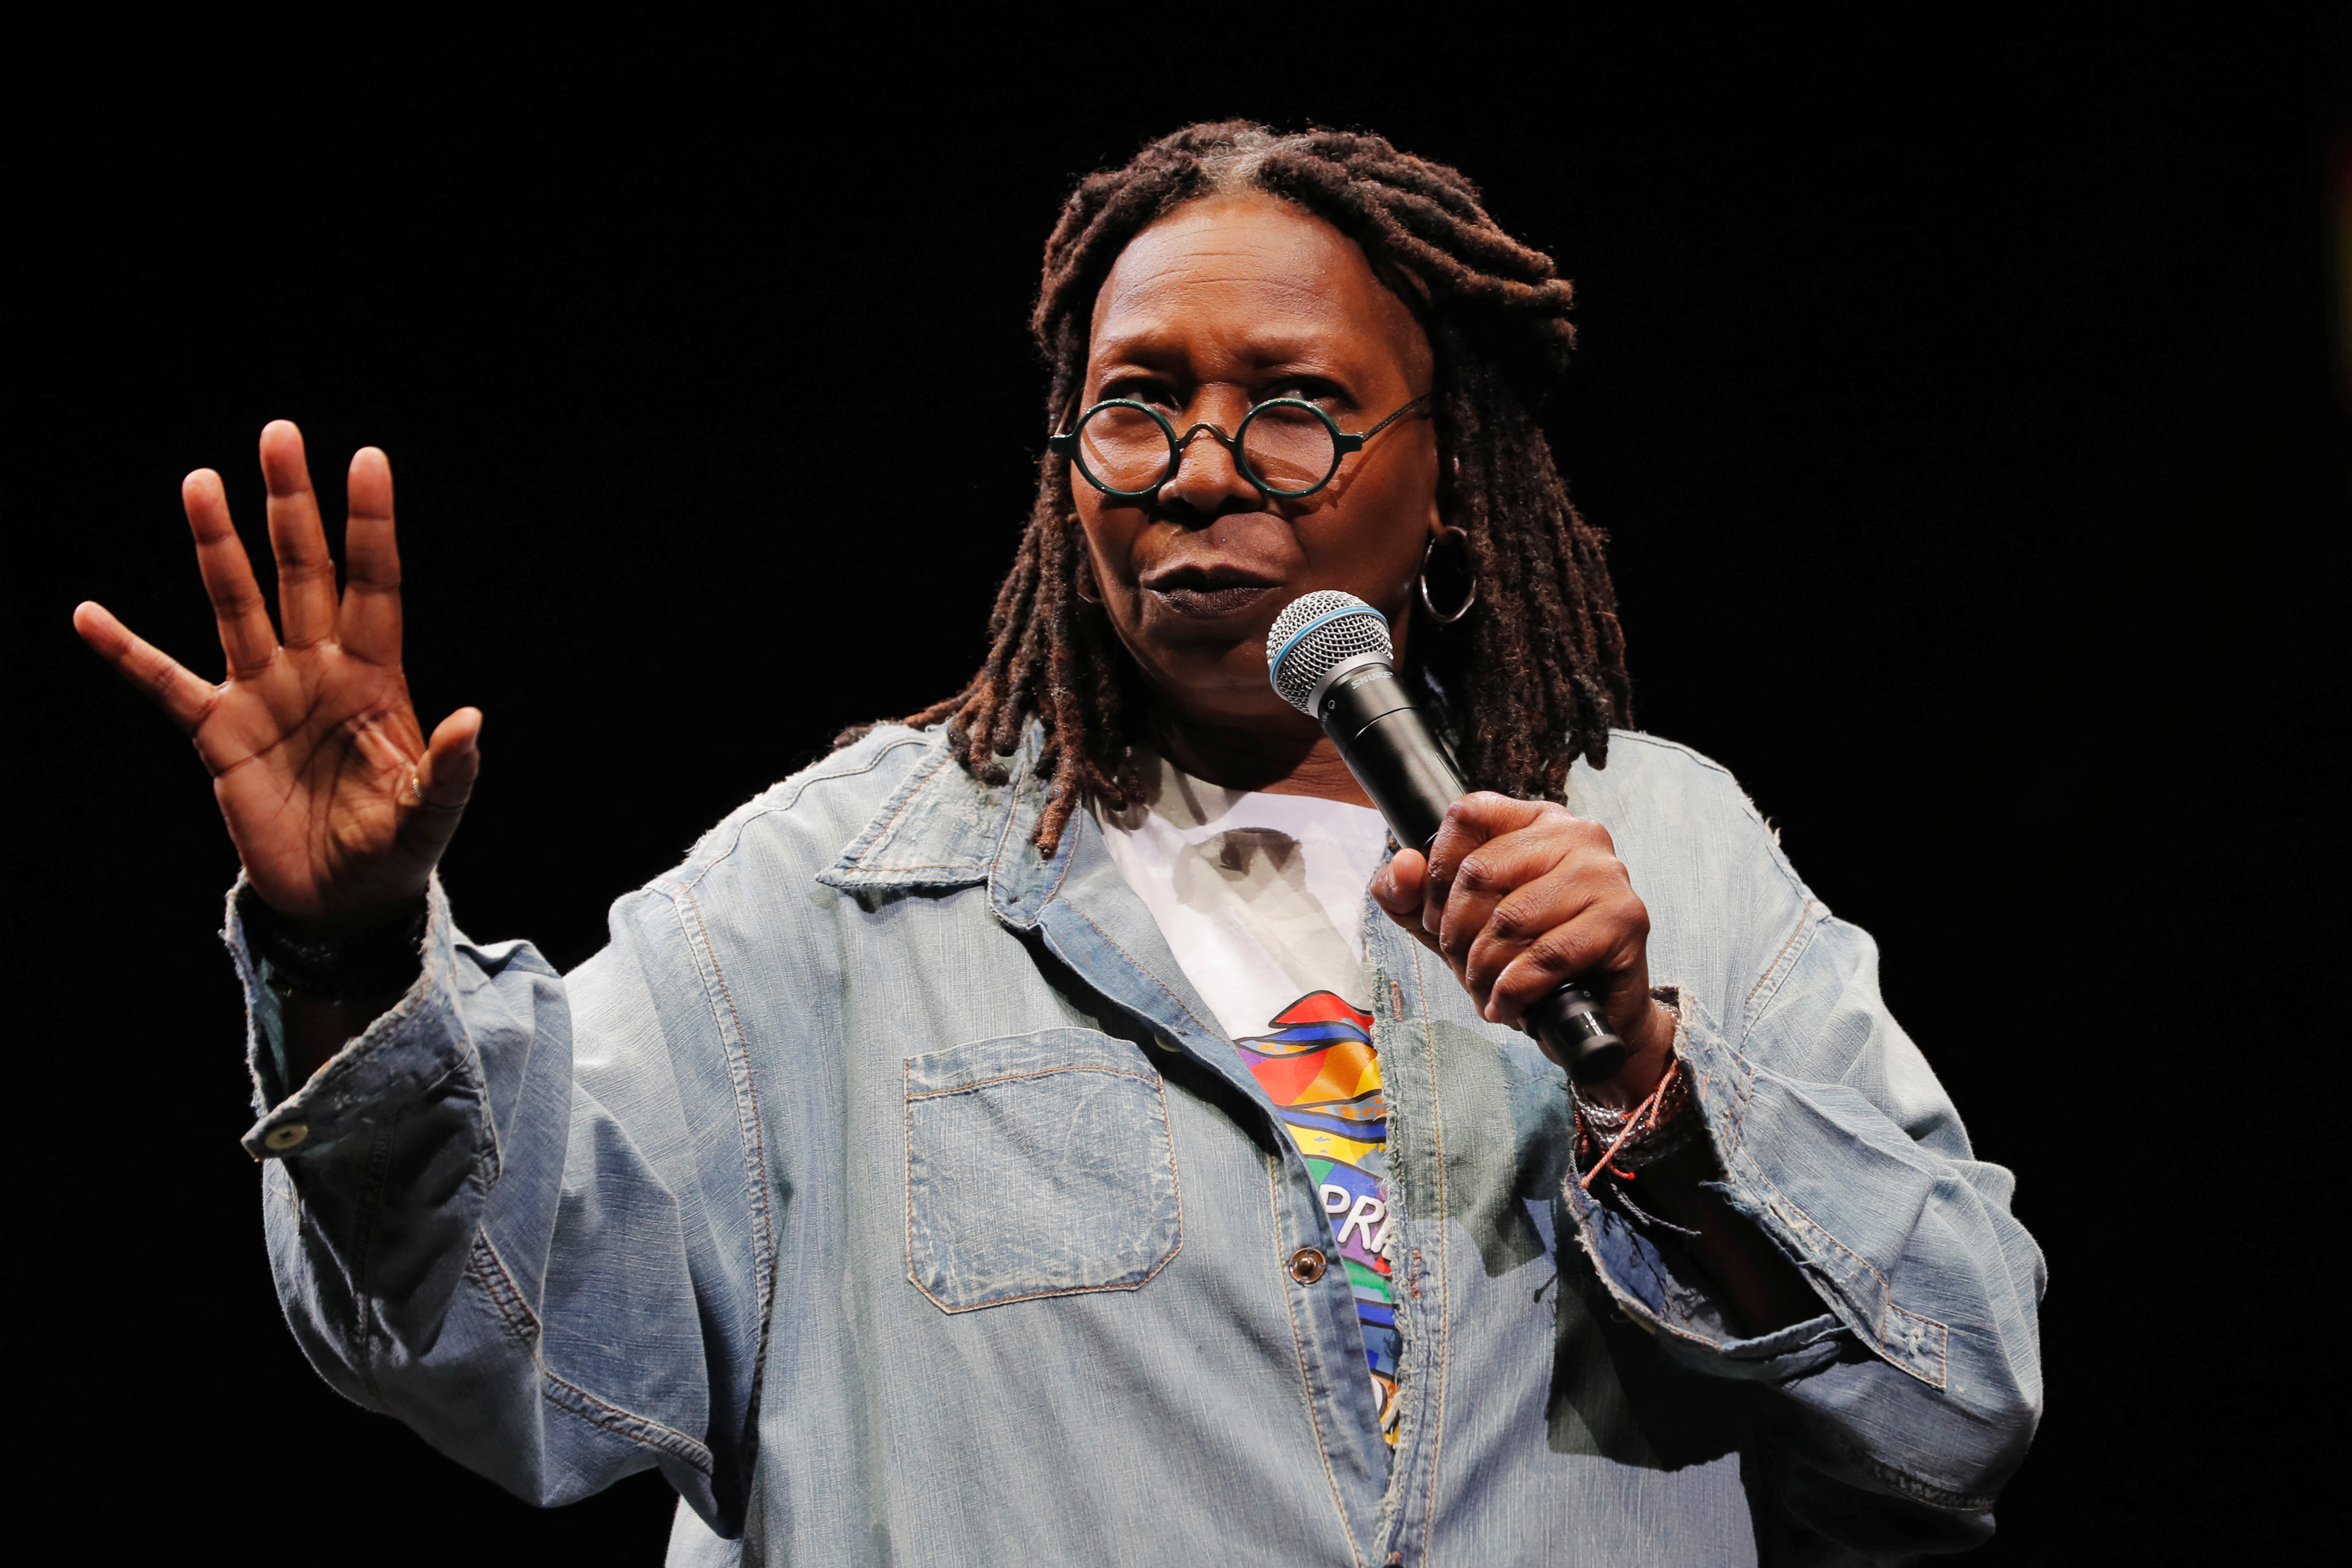 Whoopi Goldberg speaks during the WorldPride 2019 Opening Ceremony, a combined celebration marking the 50th anniversary of the 1969 Stonewall riots and WorldPride 2019 in New York